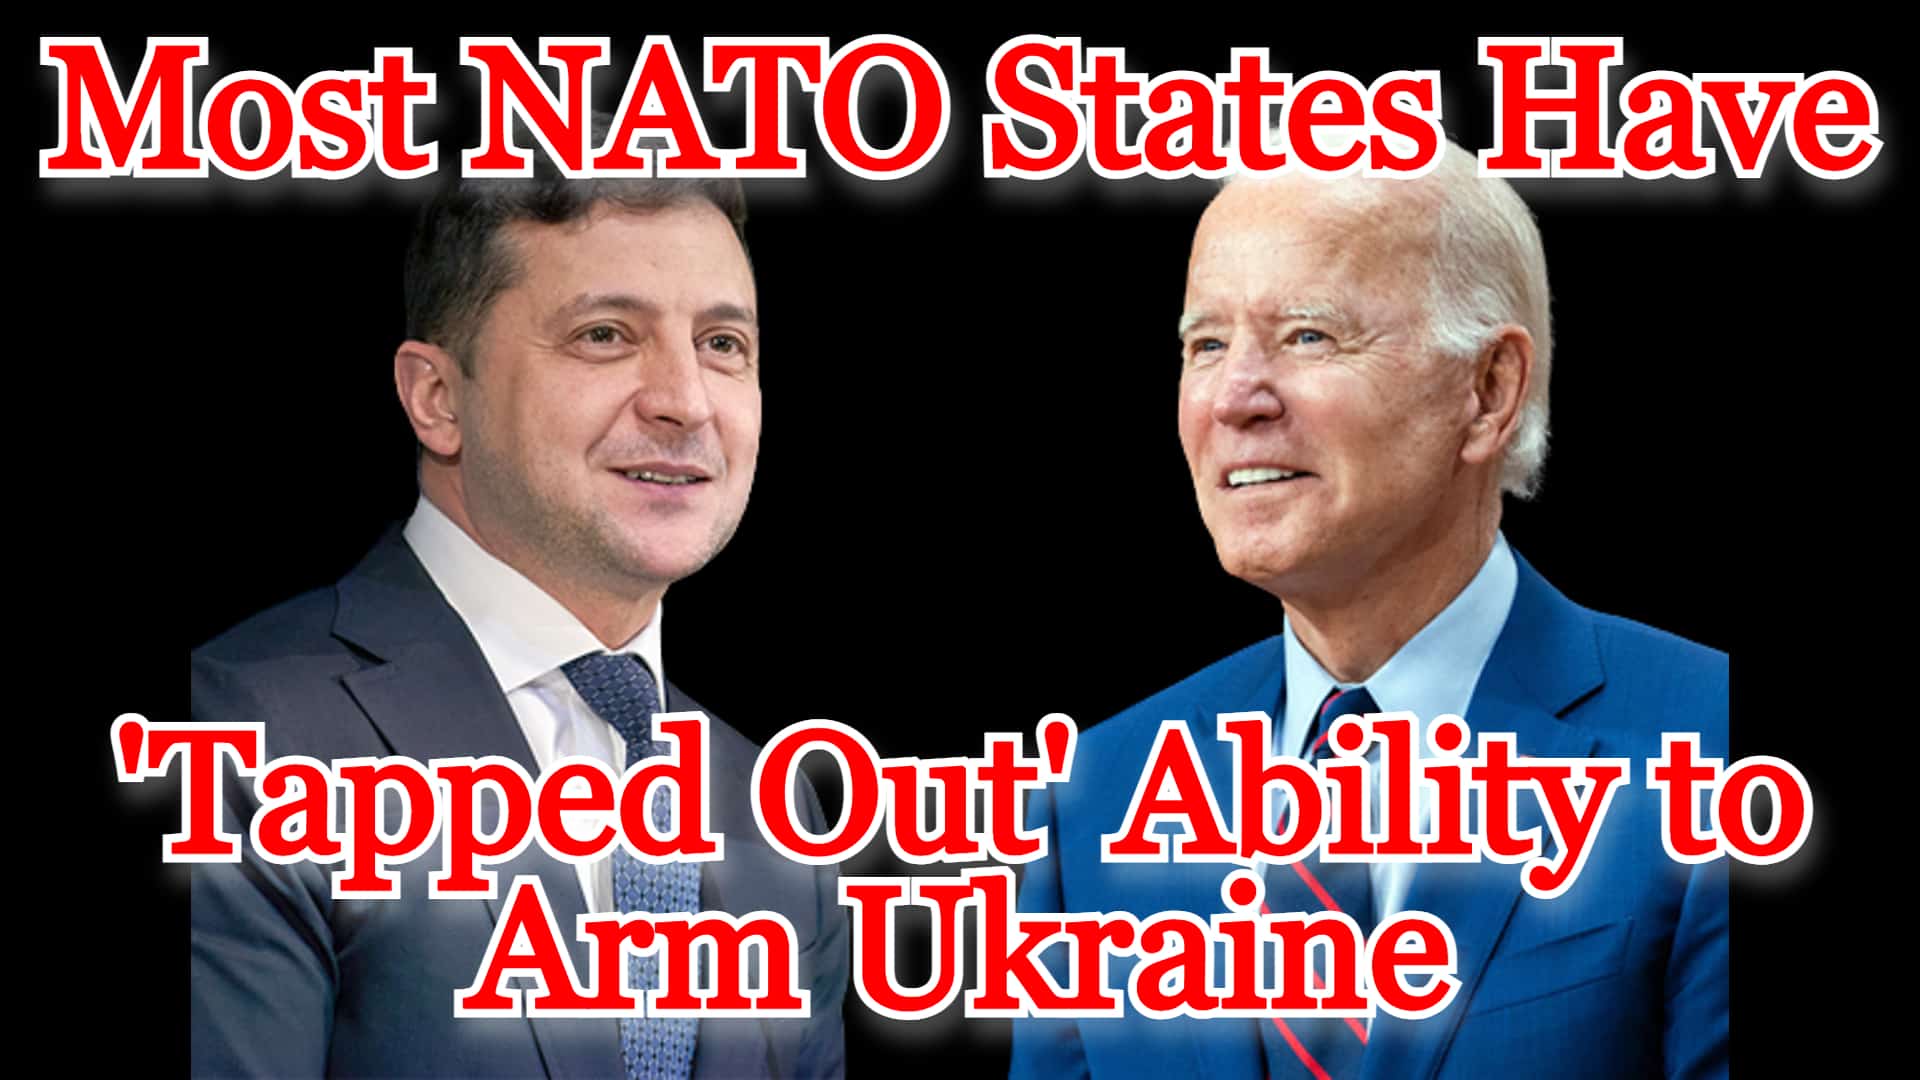 COI #354: Most NATO States Have ‘Tapped Out’ Ability to Arm Ukraine